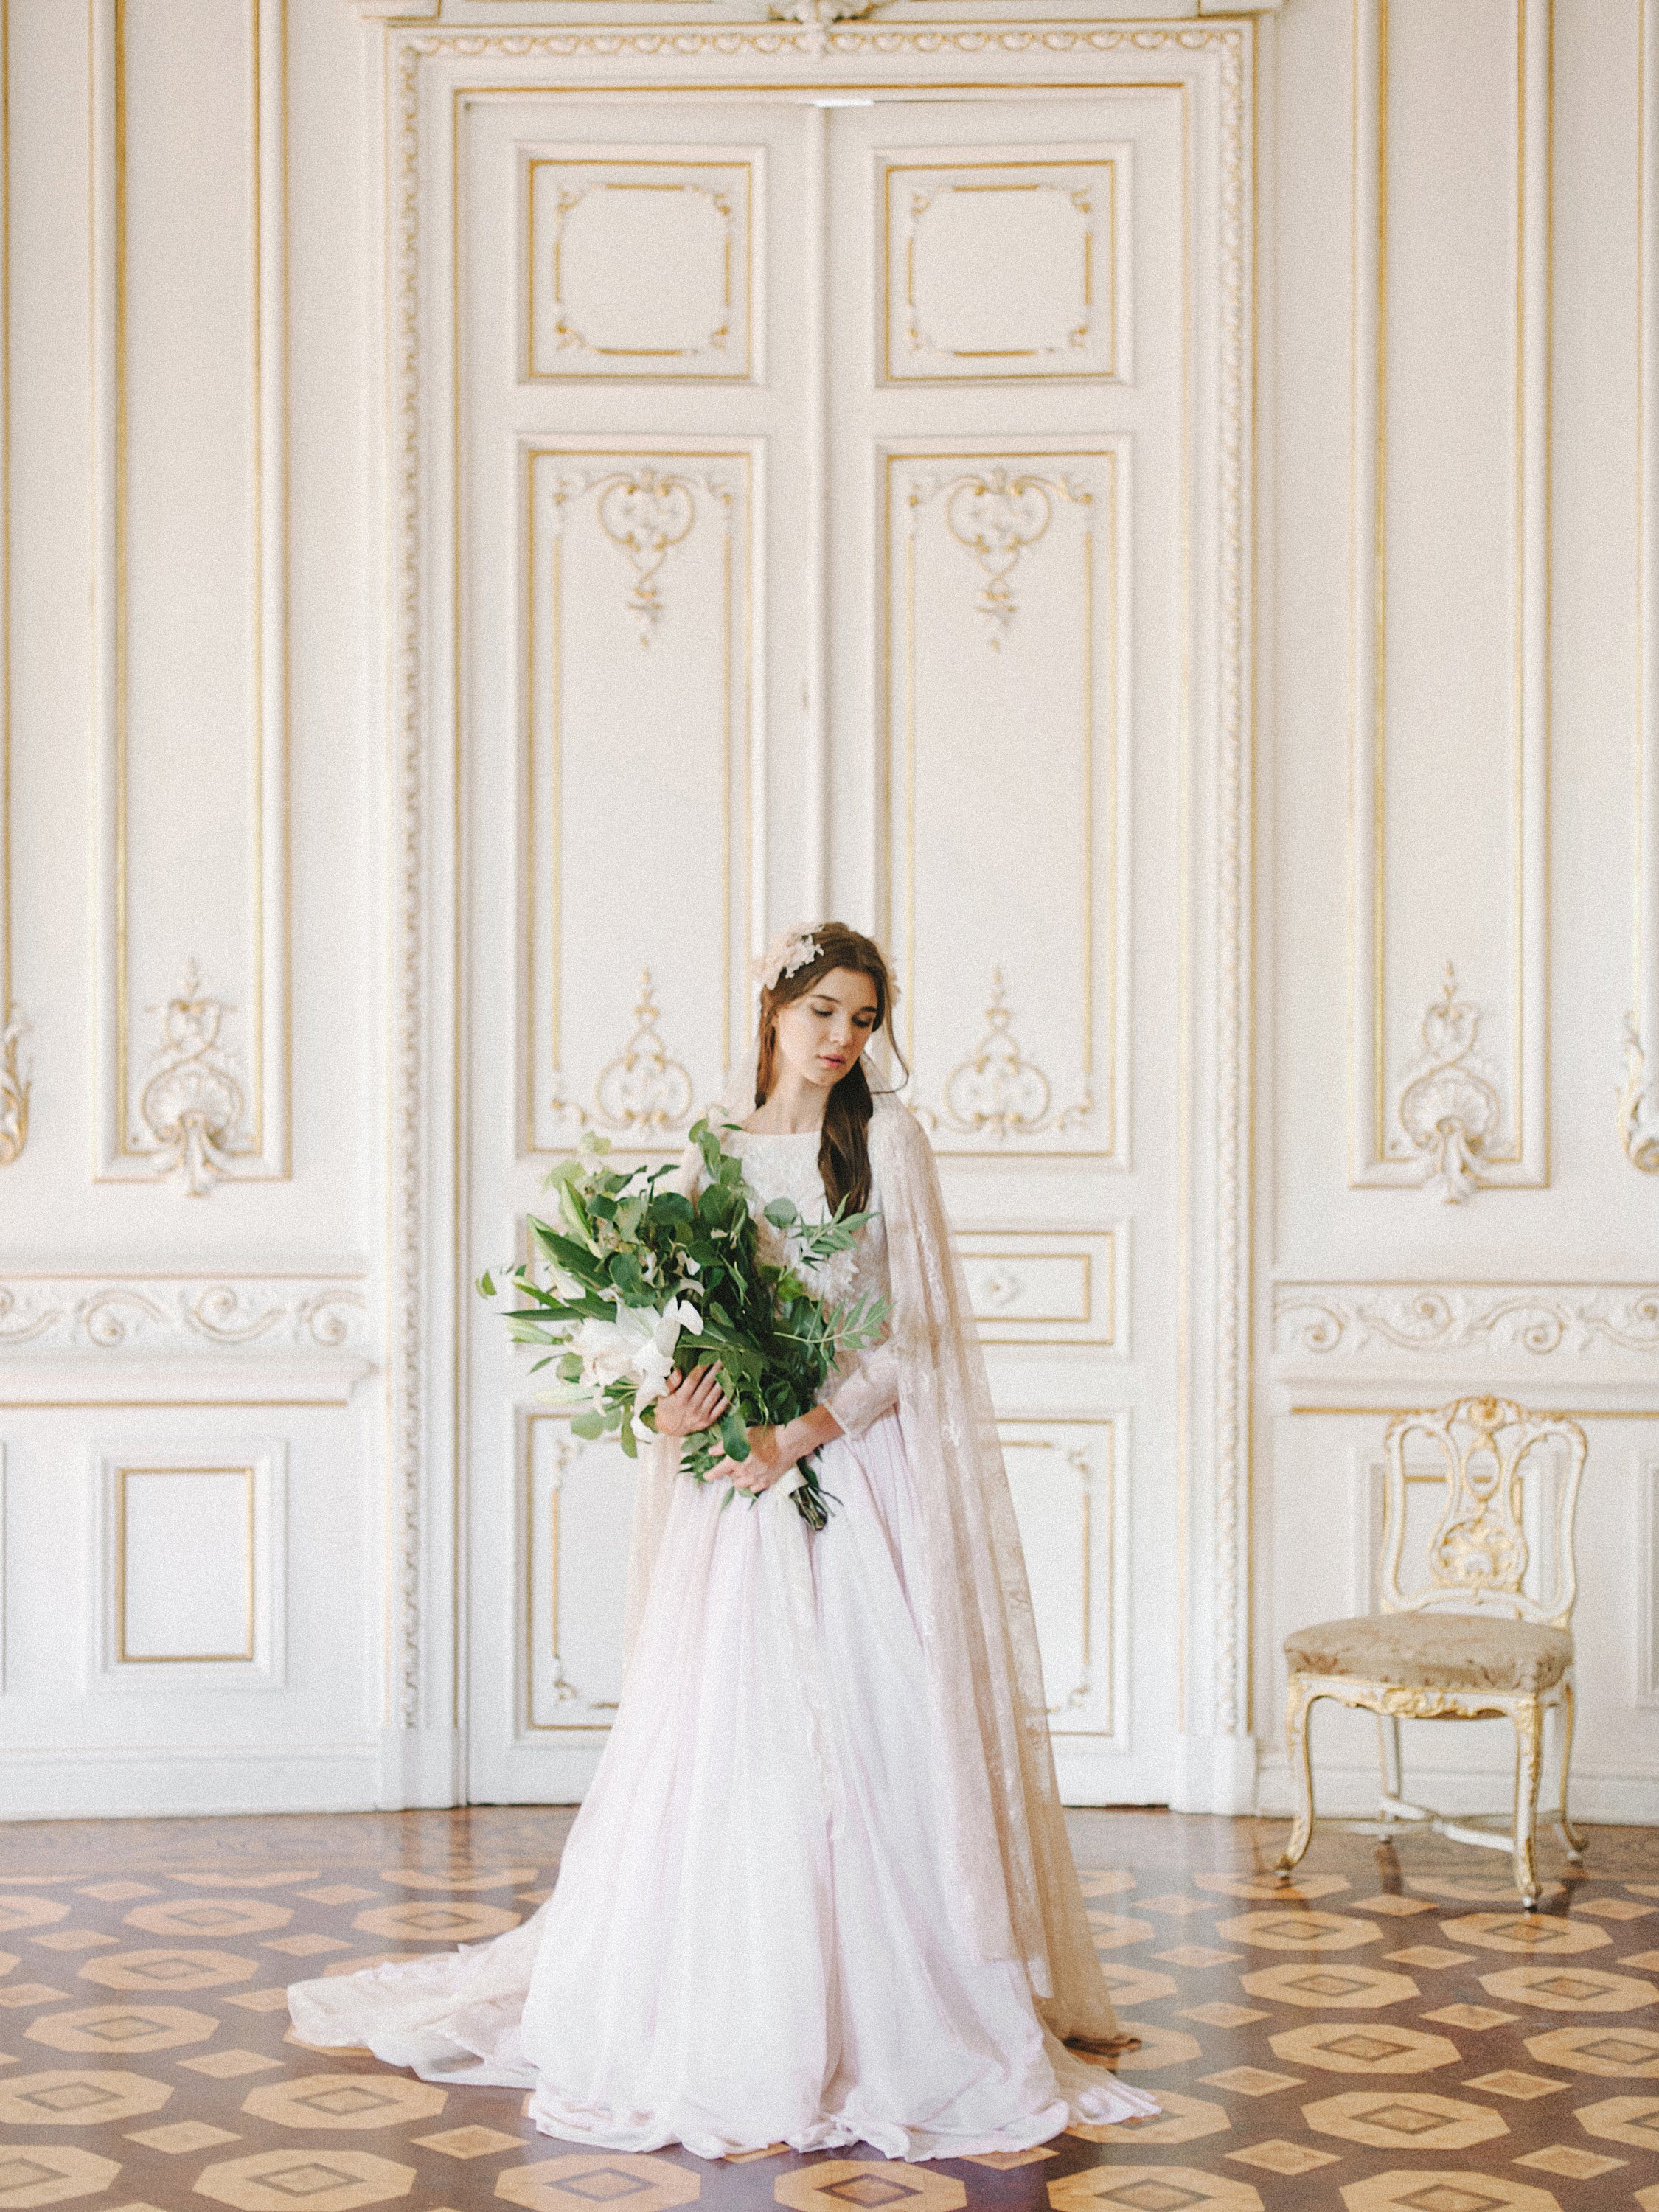 Lilac open back wedding gown with hand-cut lace appliques | Cathy Telle